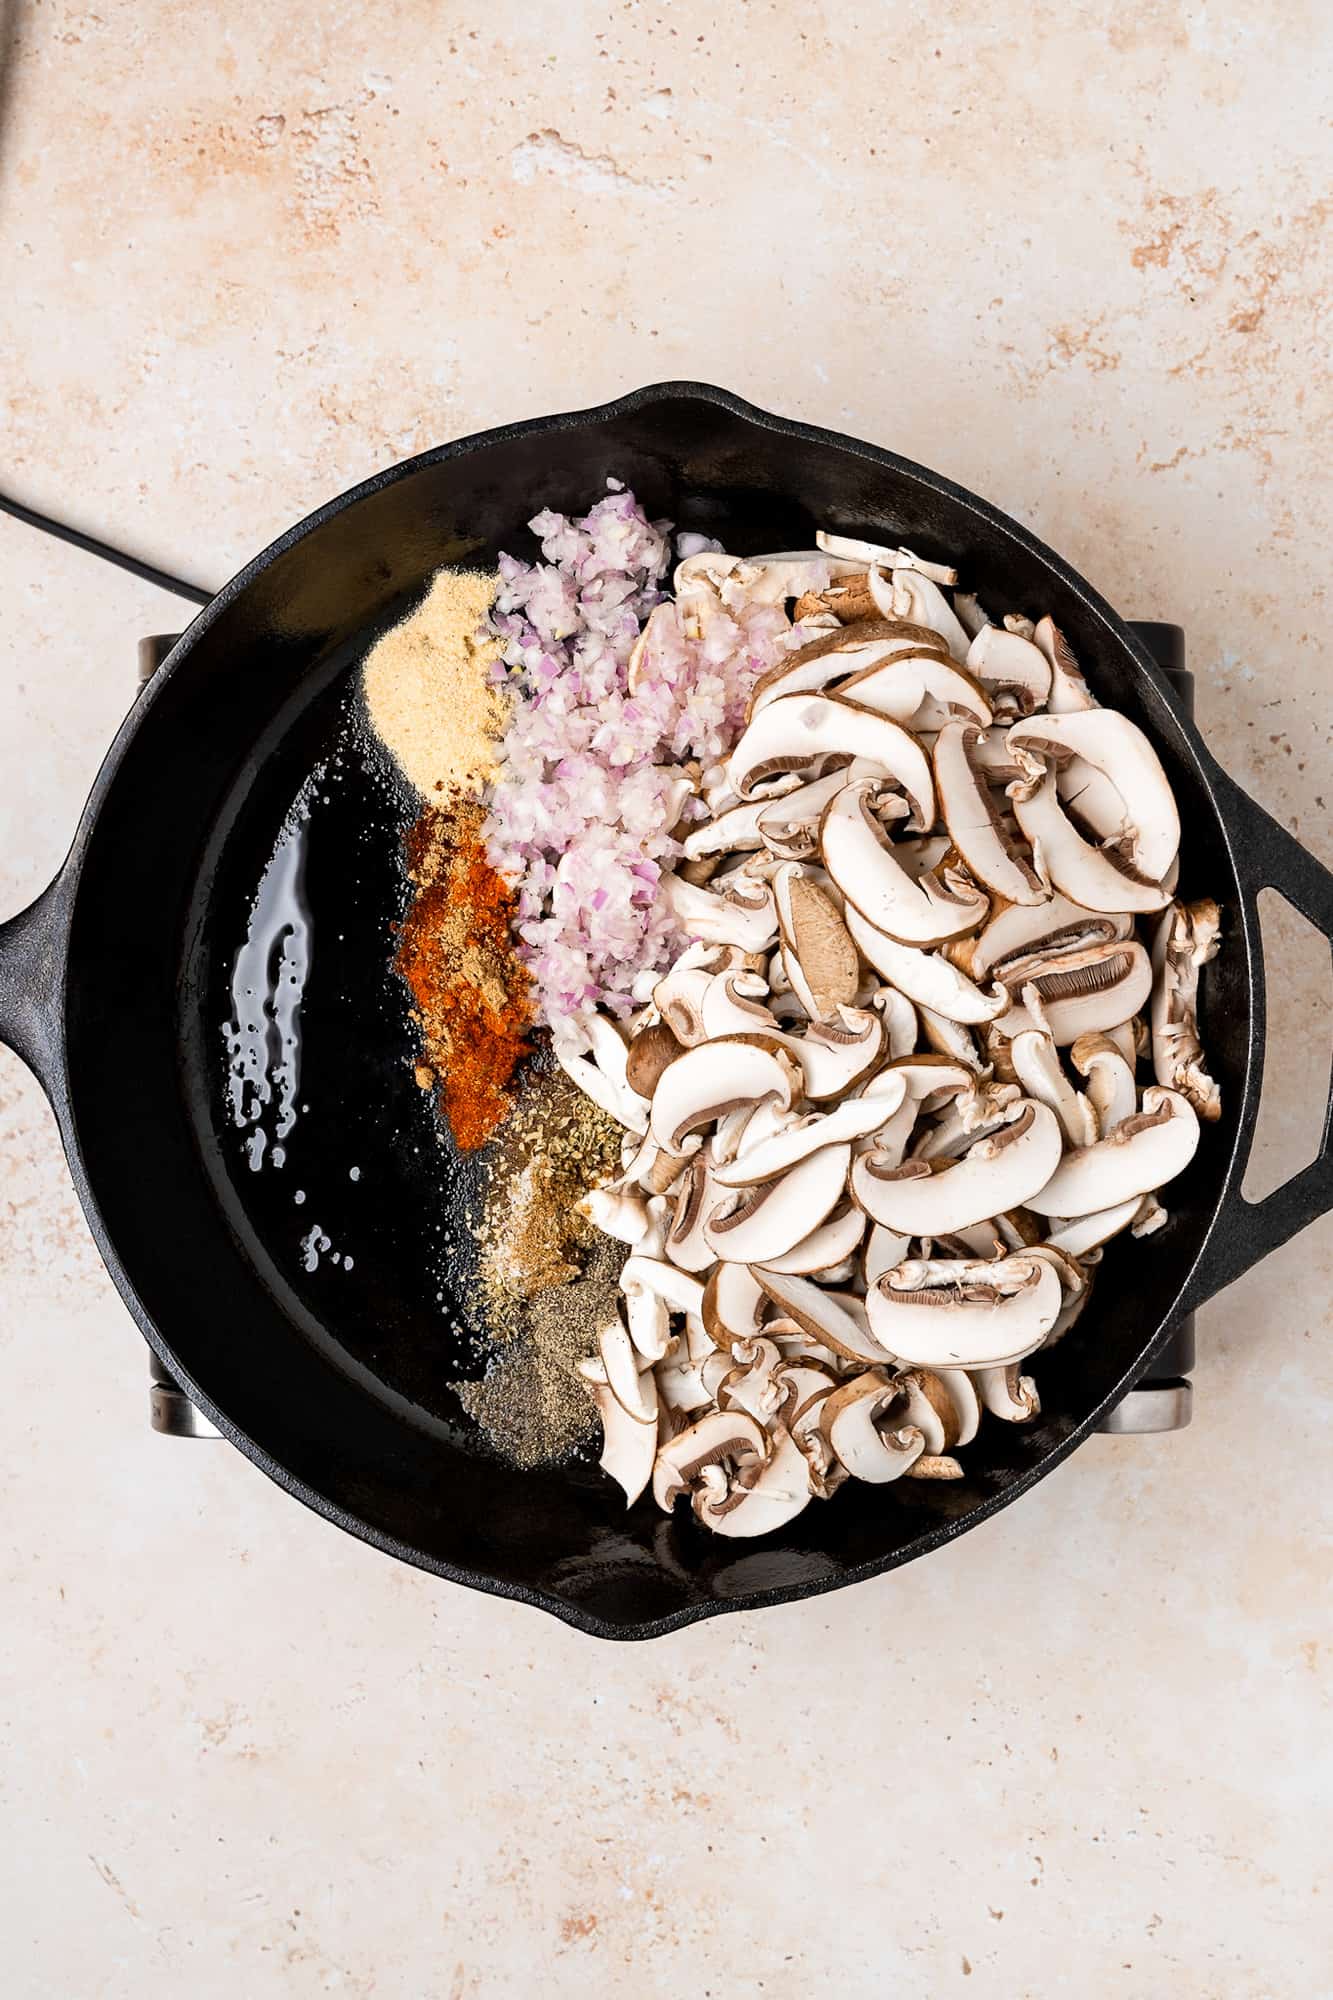 cast iron skillet with mushrooms, shallots, spices, soy sauce